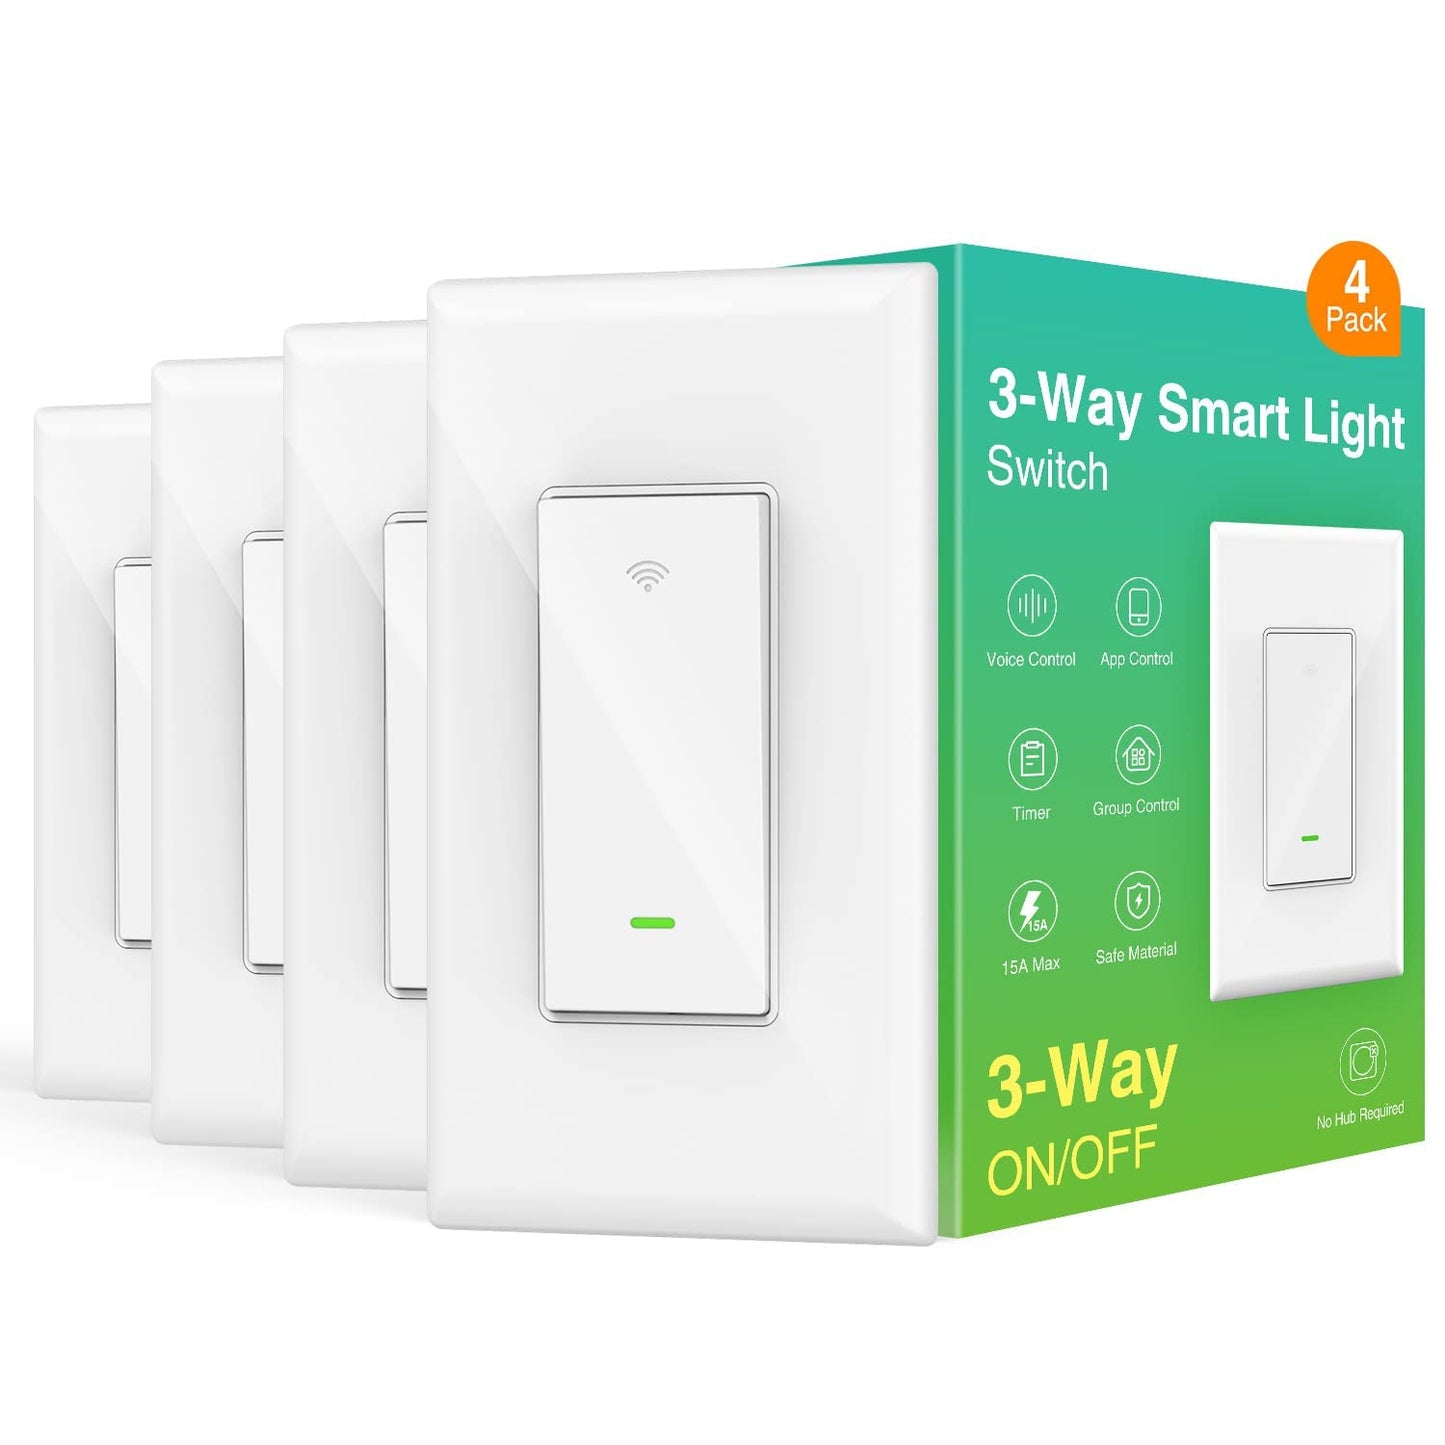 Smart Light Switch, 3 Way 2.4GHz Wi-Fi Smart Switch Compatible with Alexa and Google Home, Single Pole Wall Switch for Lights, ETL FCC Certified, Neutral Wire Required, No Hub Required (2 Pack)